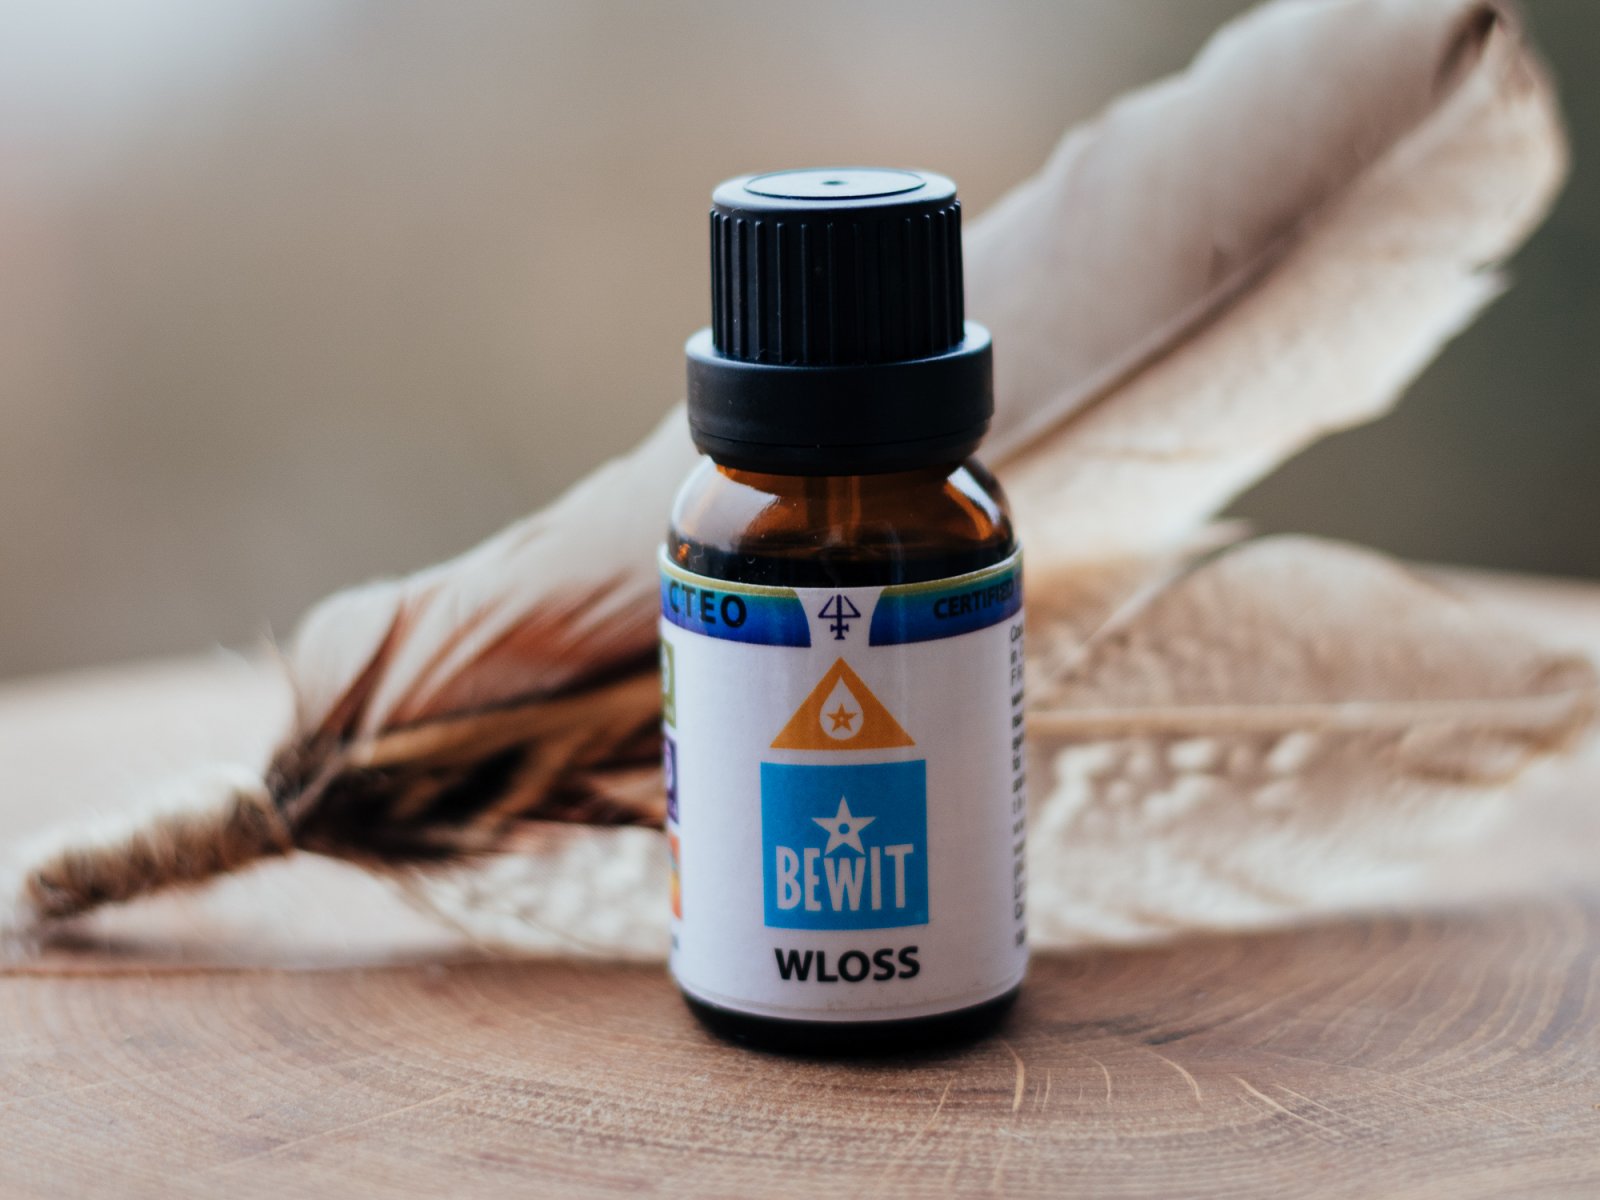 BEWIT WLOSS - 100% natural essential oil blend in CTEO® quality - 4